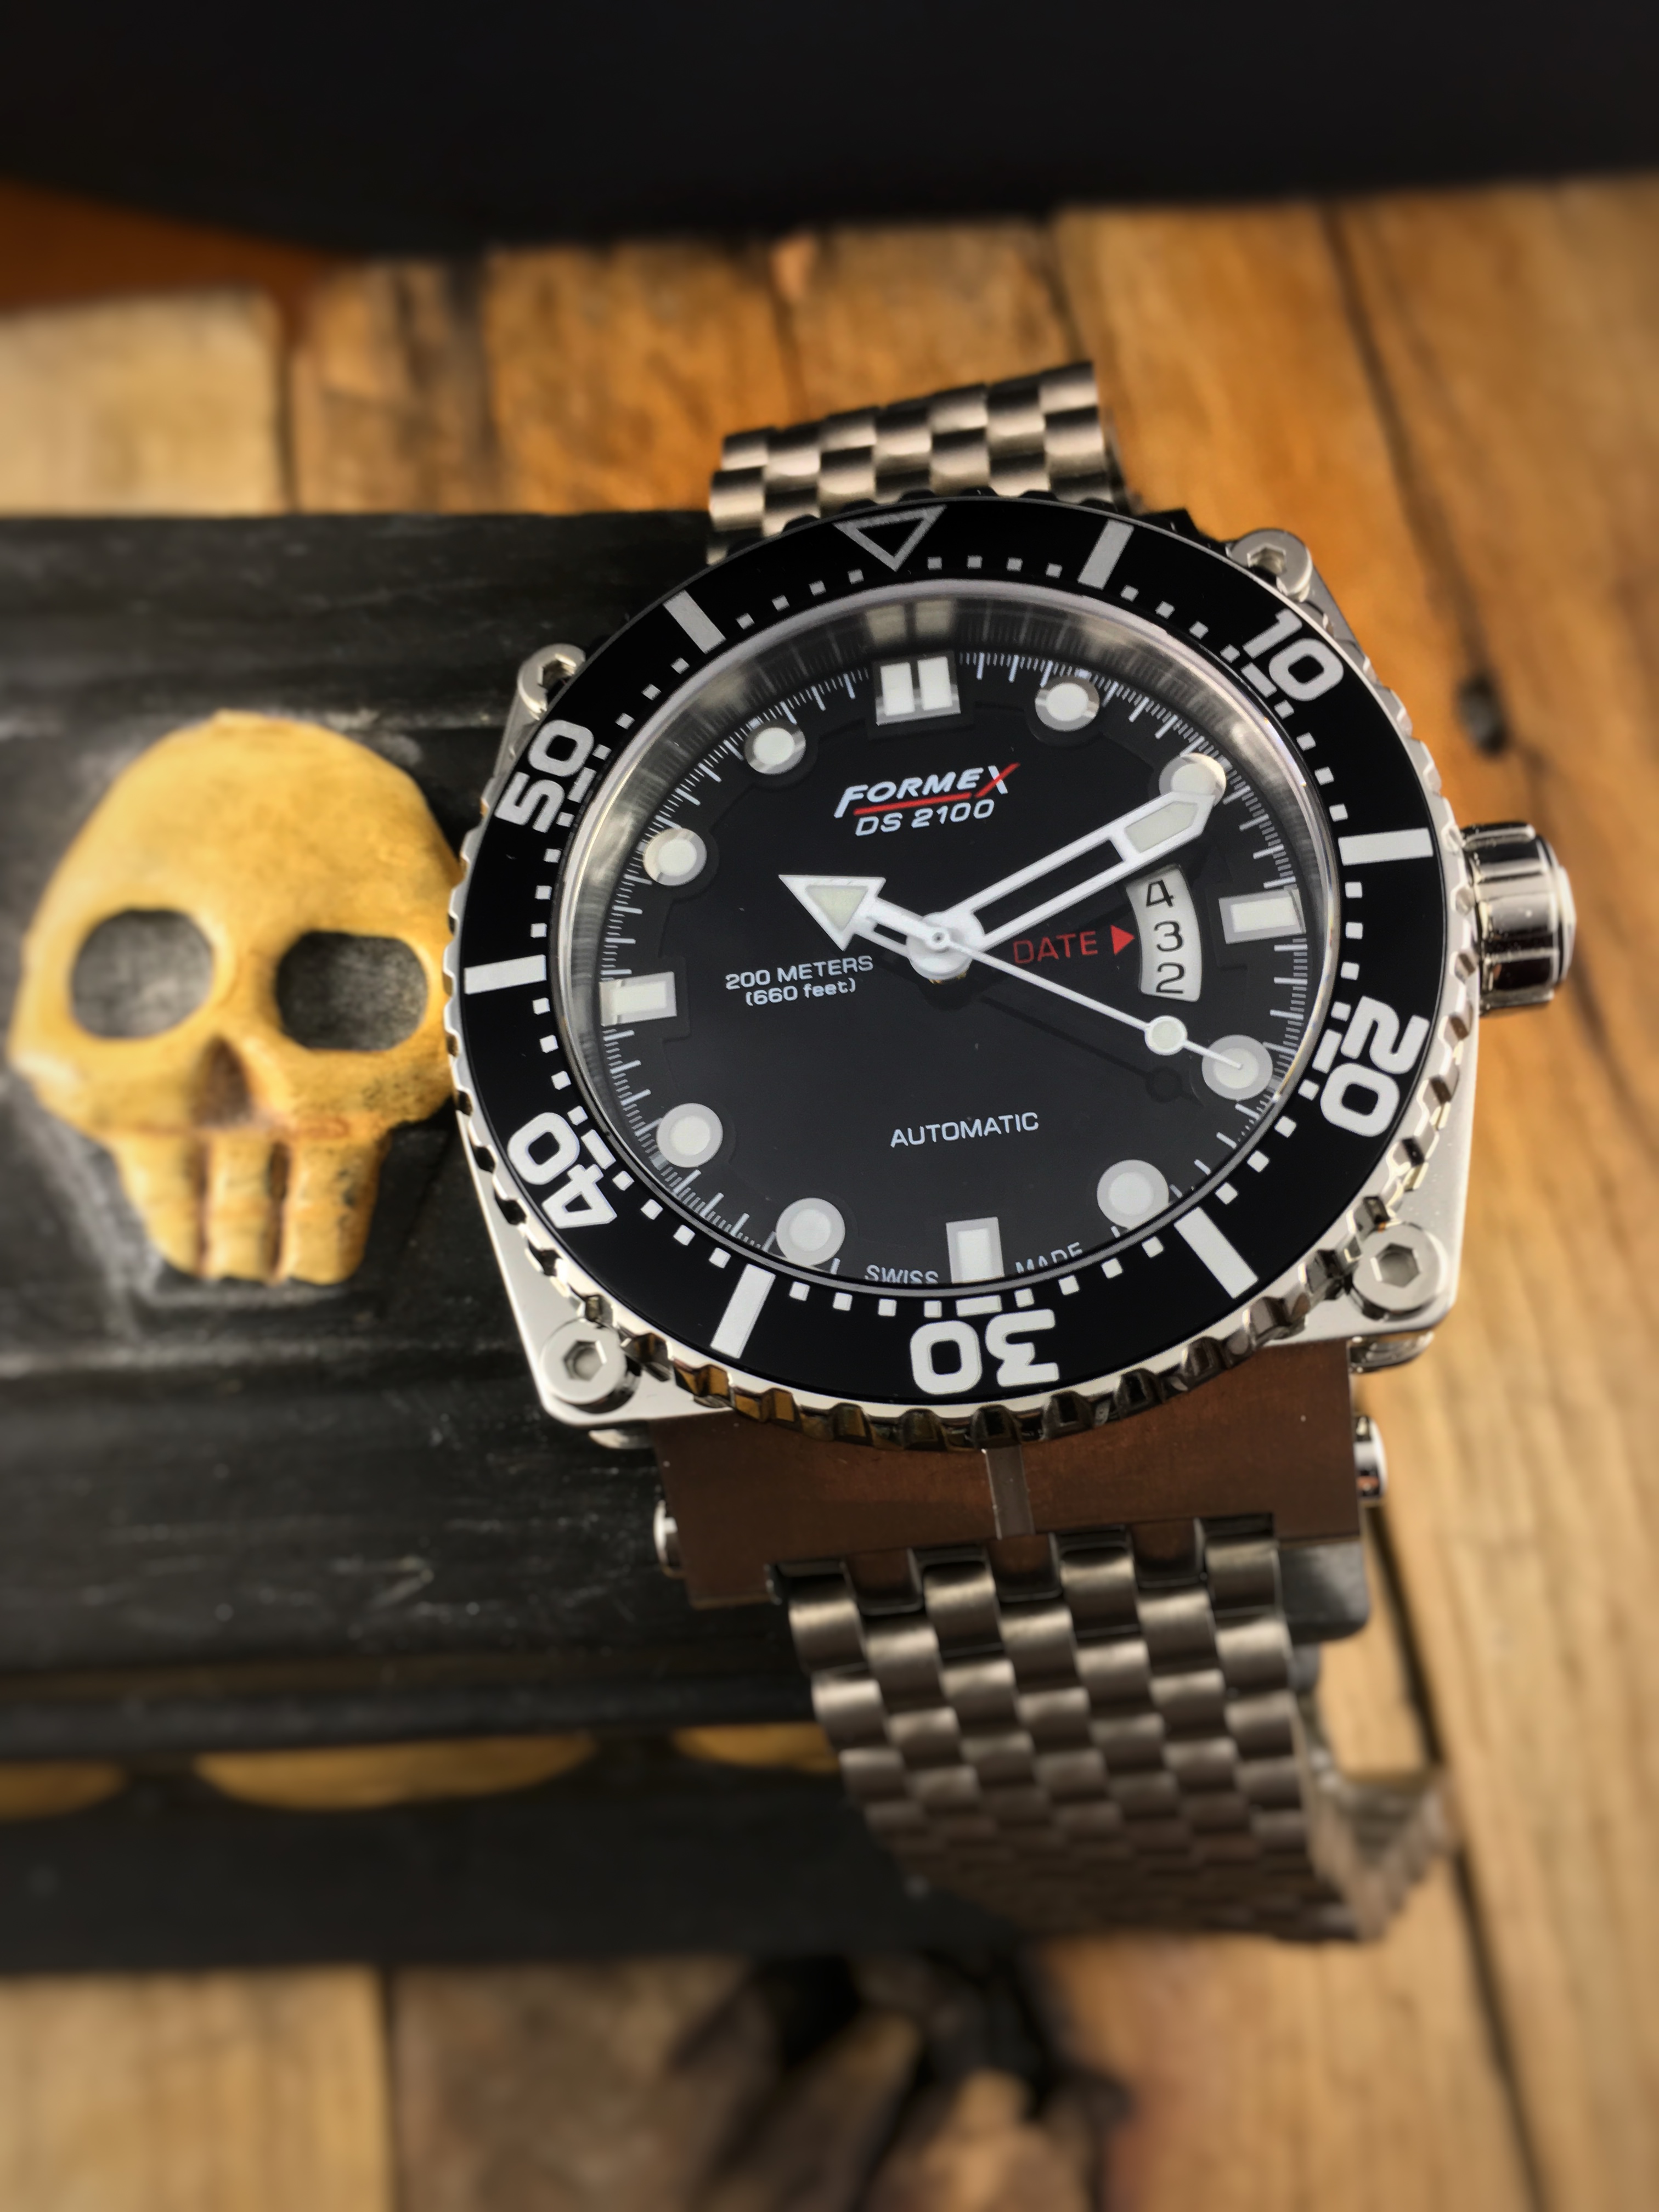 Watch Review: Formex DS2100 7020 – Time to Blog Watches